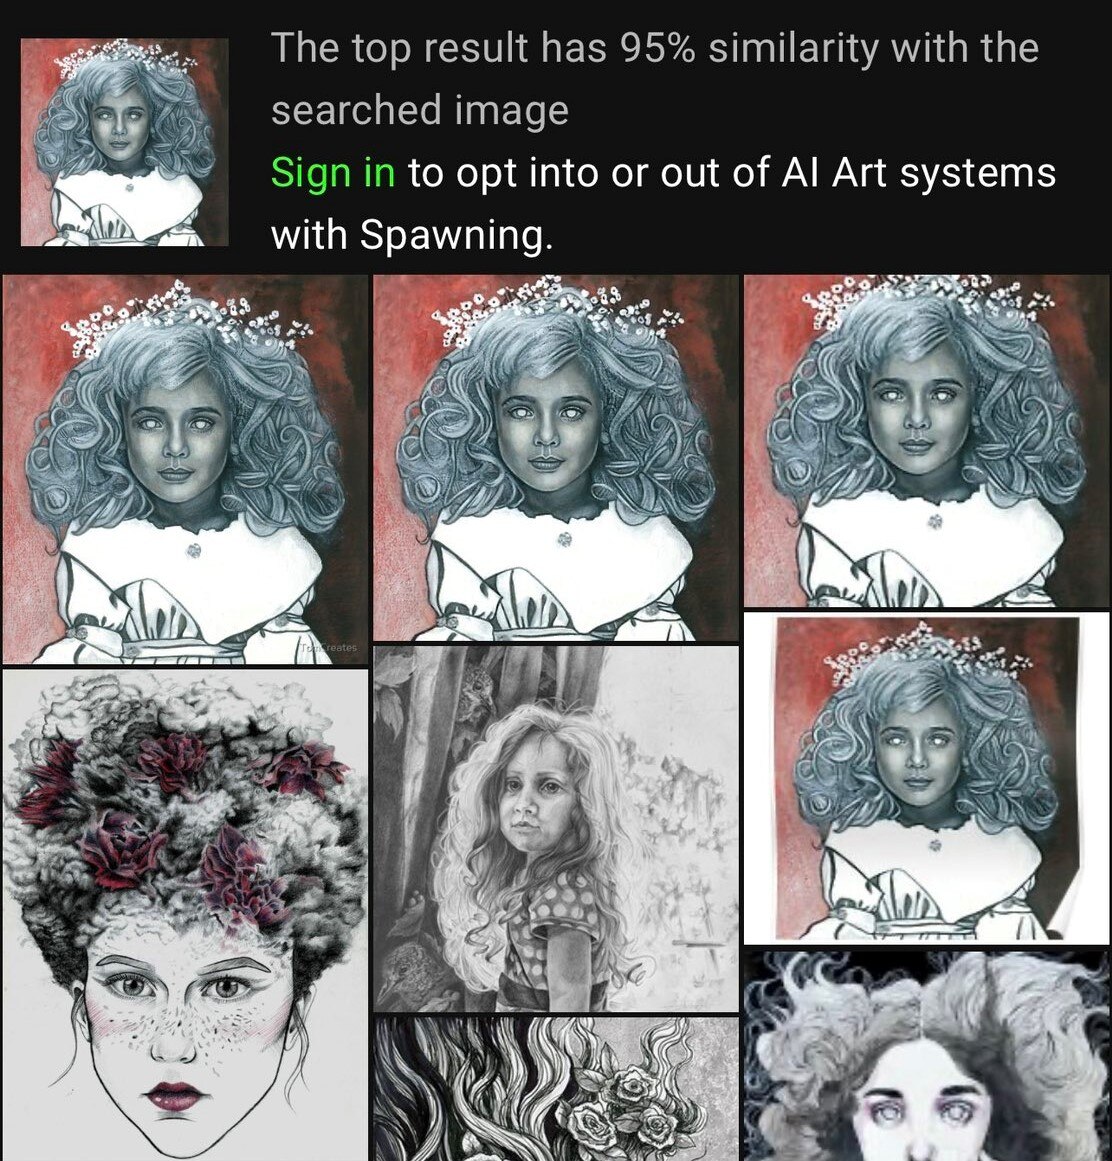 A composite of many images, some identical, of a drawing of a girl with long hair, taken from haveibeentrained.com